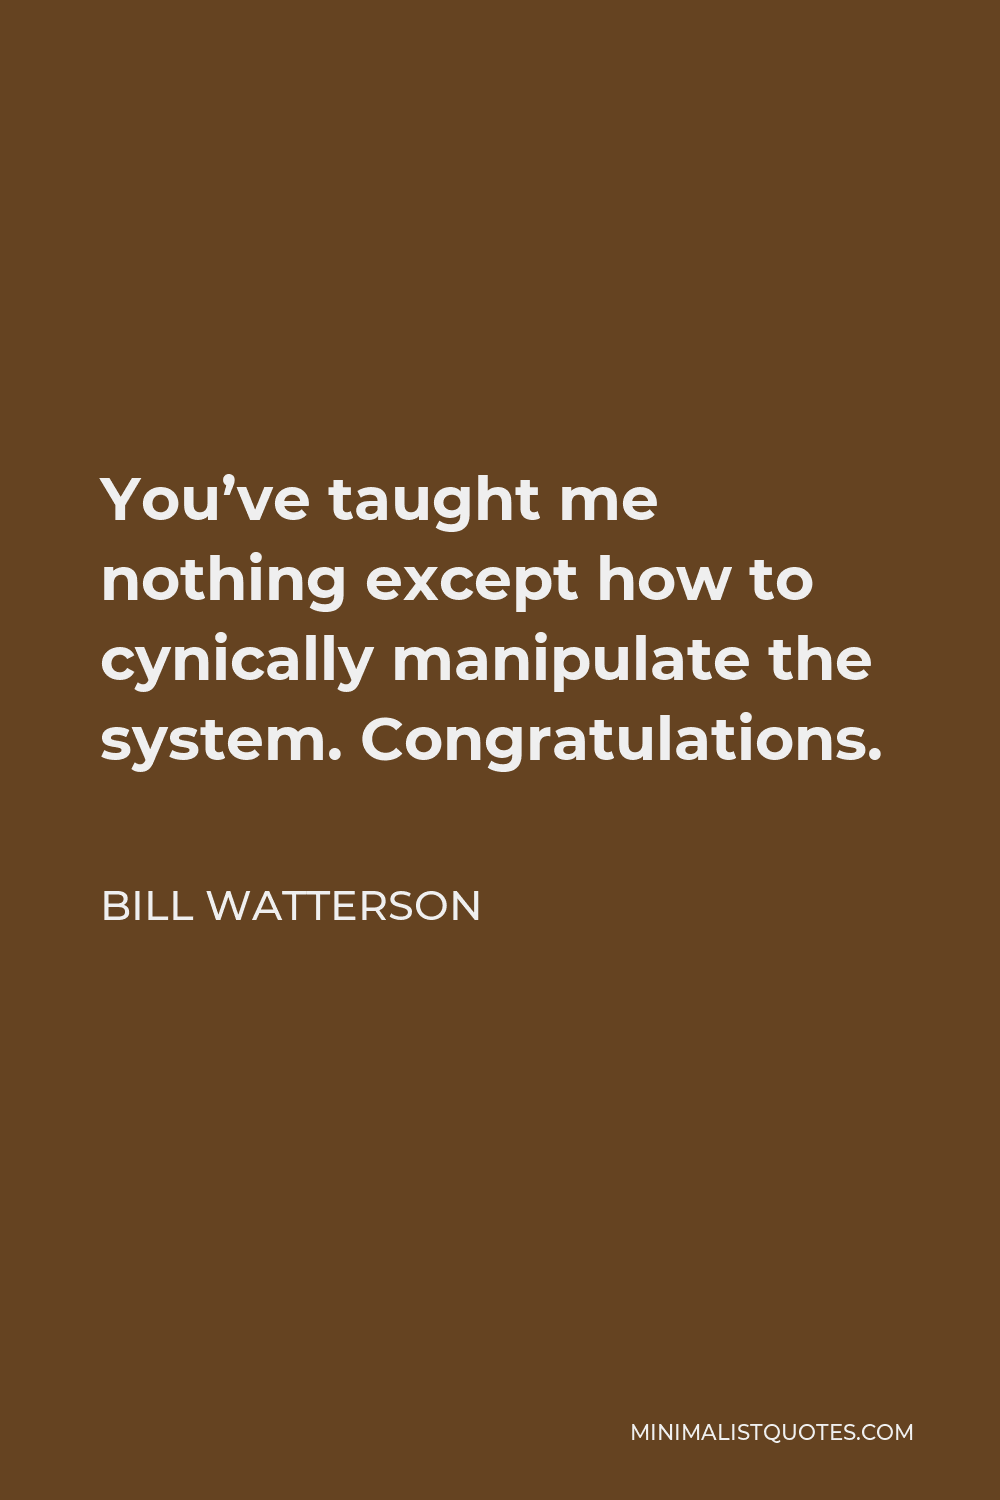 Bill Watterson Quote - You’ve taught me nothing except how to cynically manipulate the system. Congratulations.